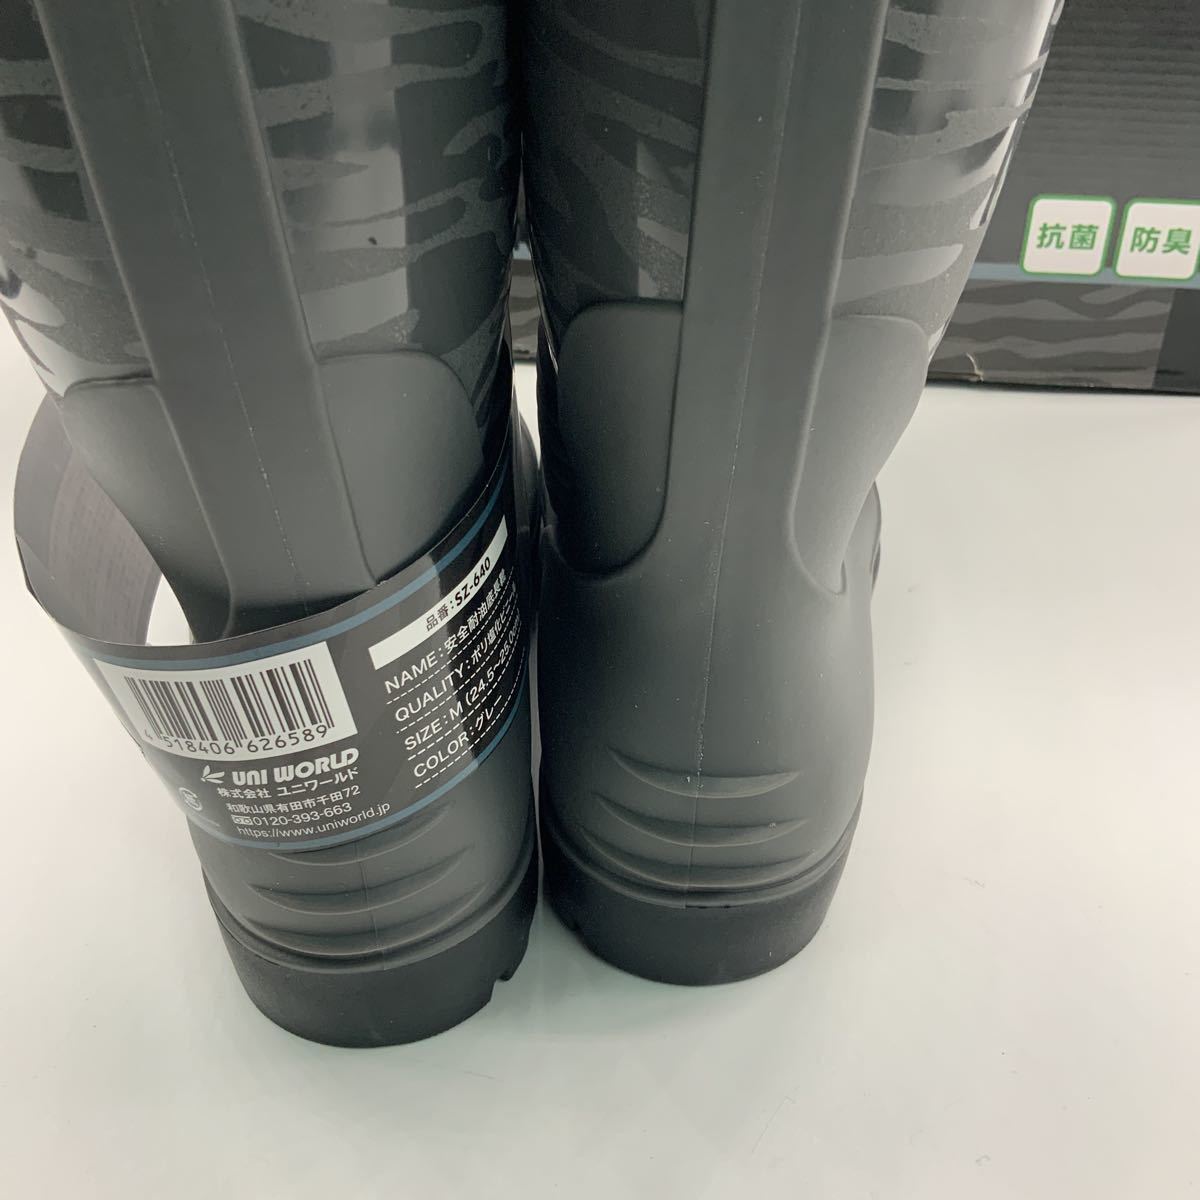  free shipping Uni world 3L safety oil resistant bottom boots SZ-640 safety boots safety boots camouflage gray new goods 